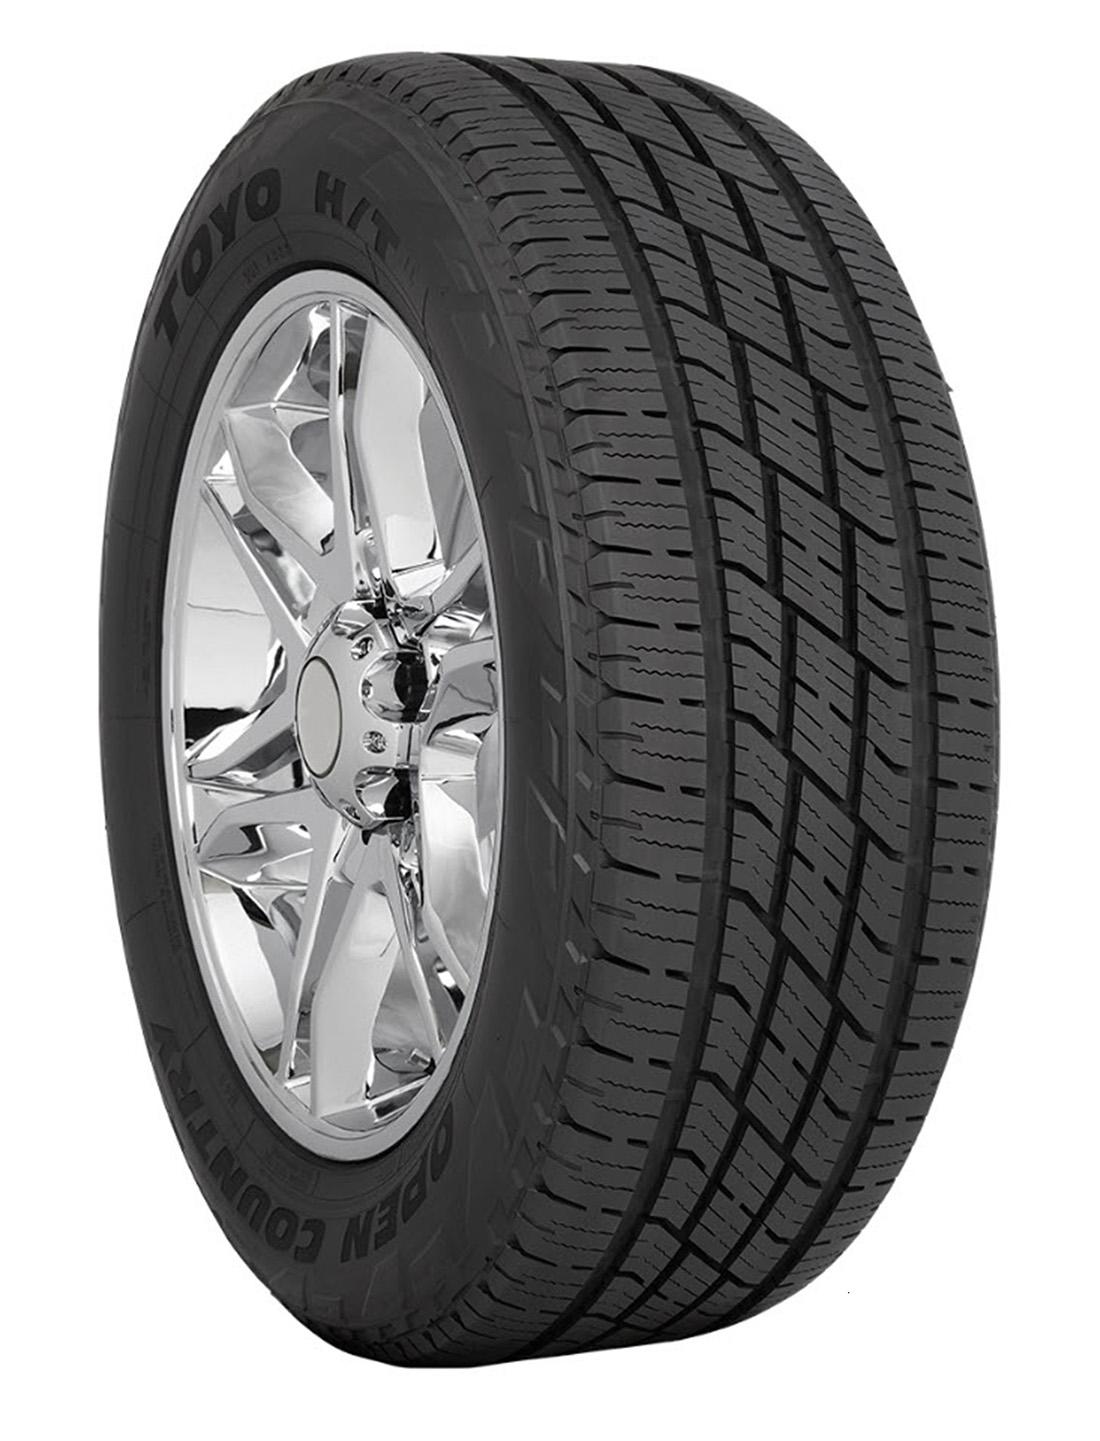 Toyo - PROXES HT  NW  245/60R18